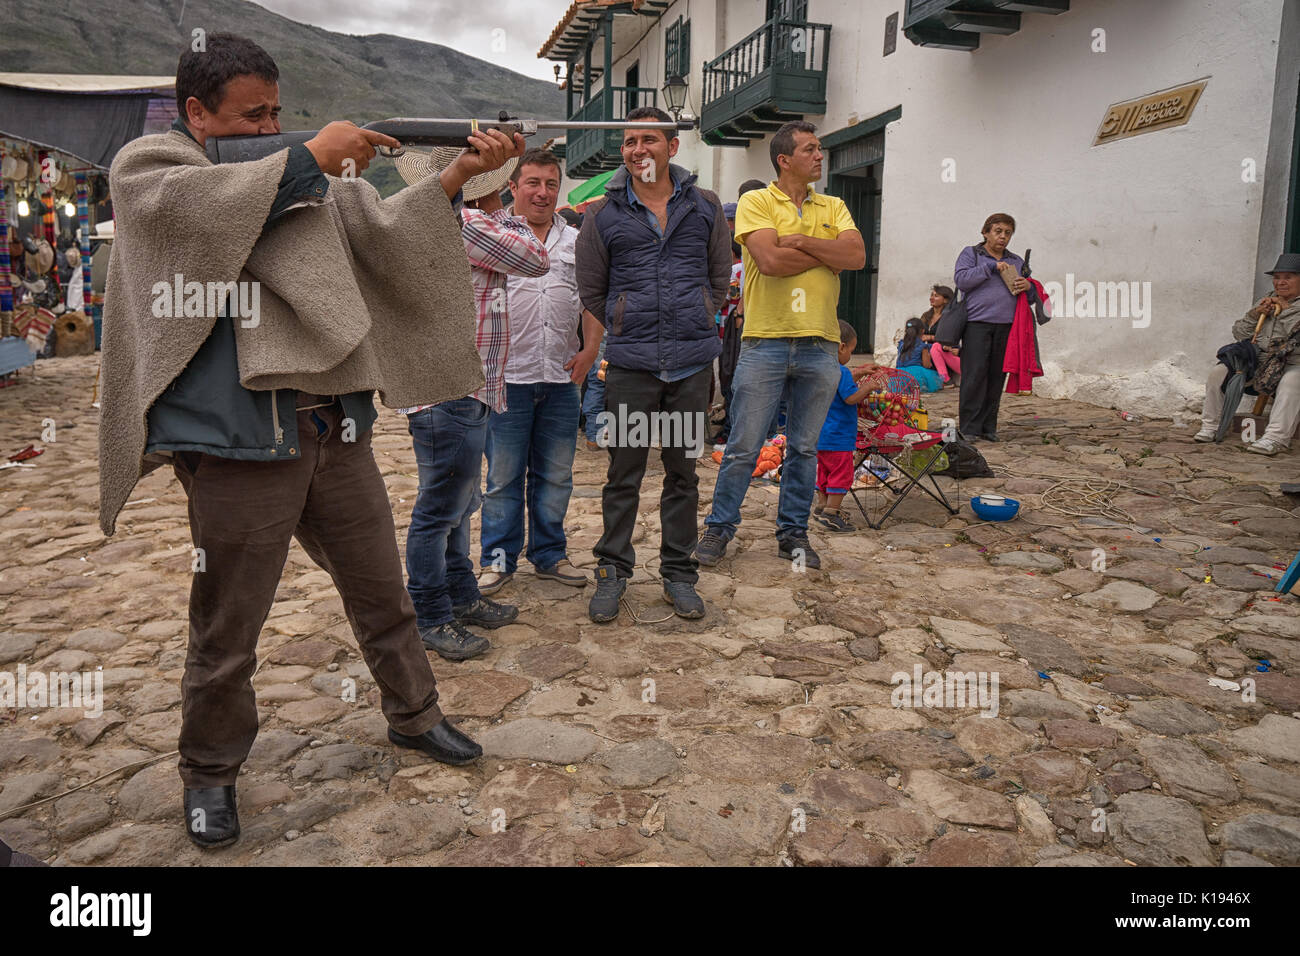 July 16, 2017 Villa de Leyva, Colombia: a local man wearing poncho aiming with a pellet gun during a fiesta Stock Photo